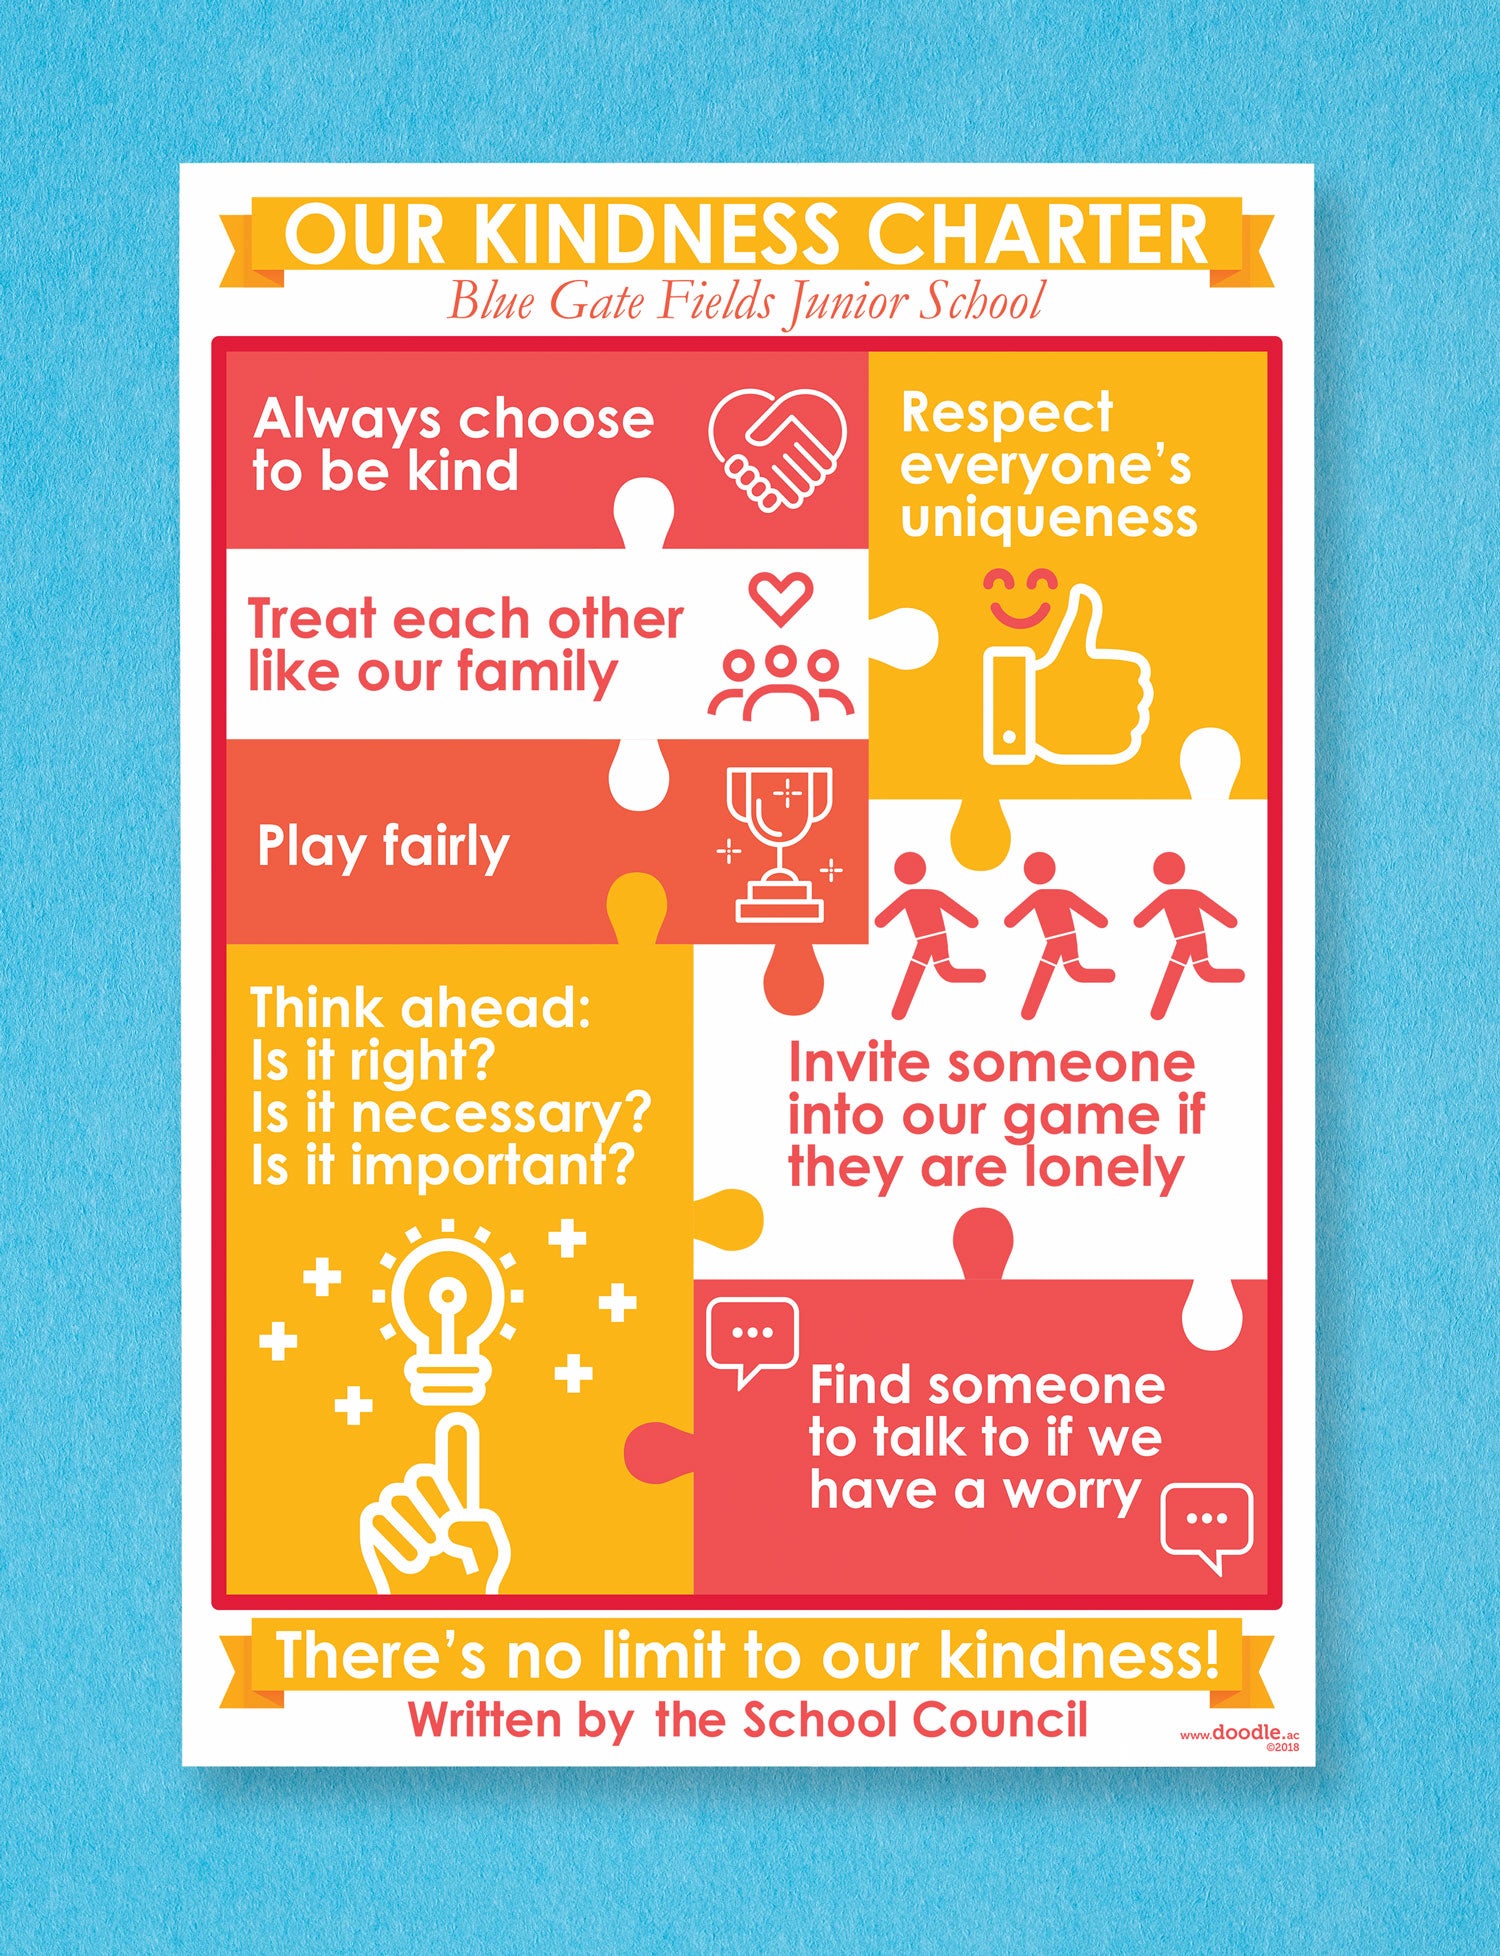 Our kindness charter poster – doodle education